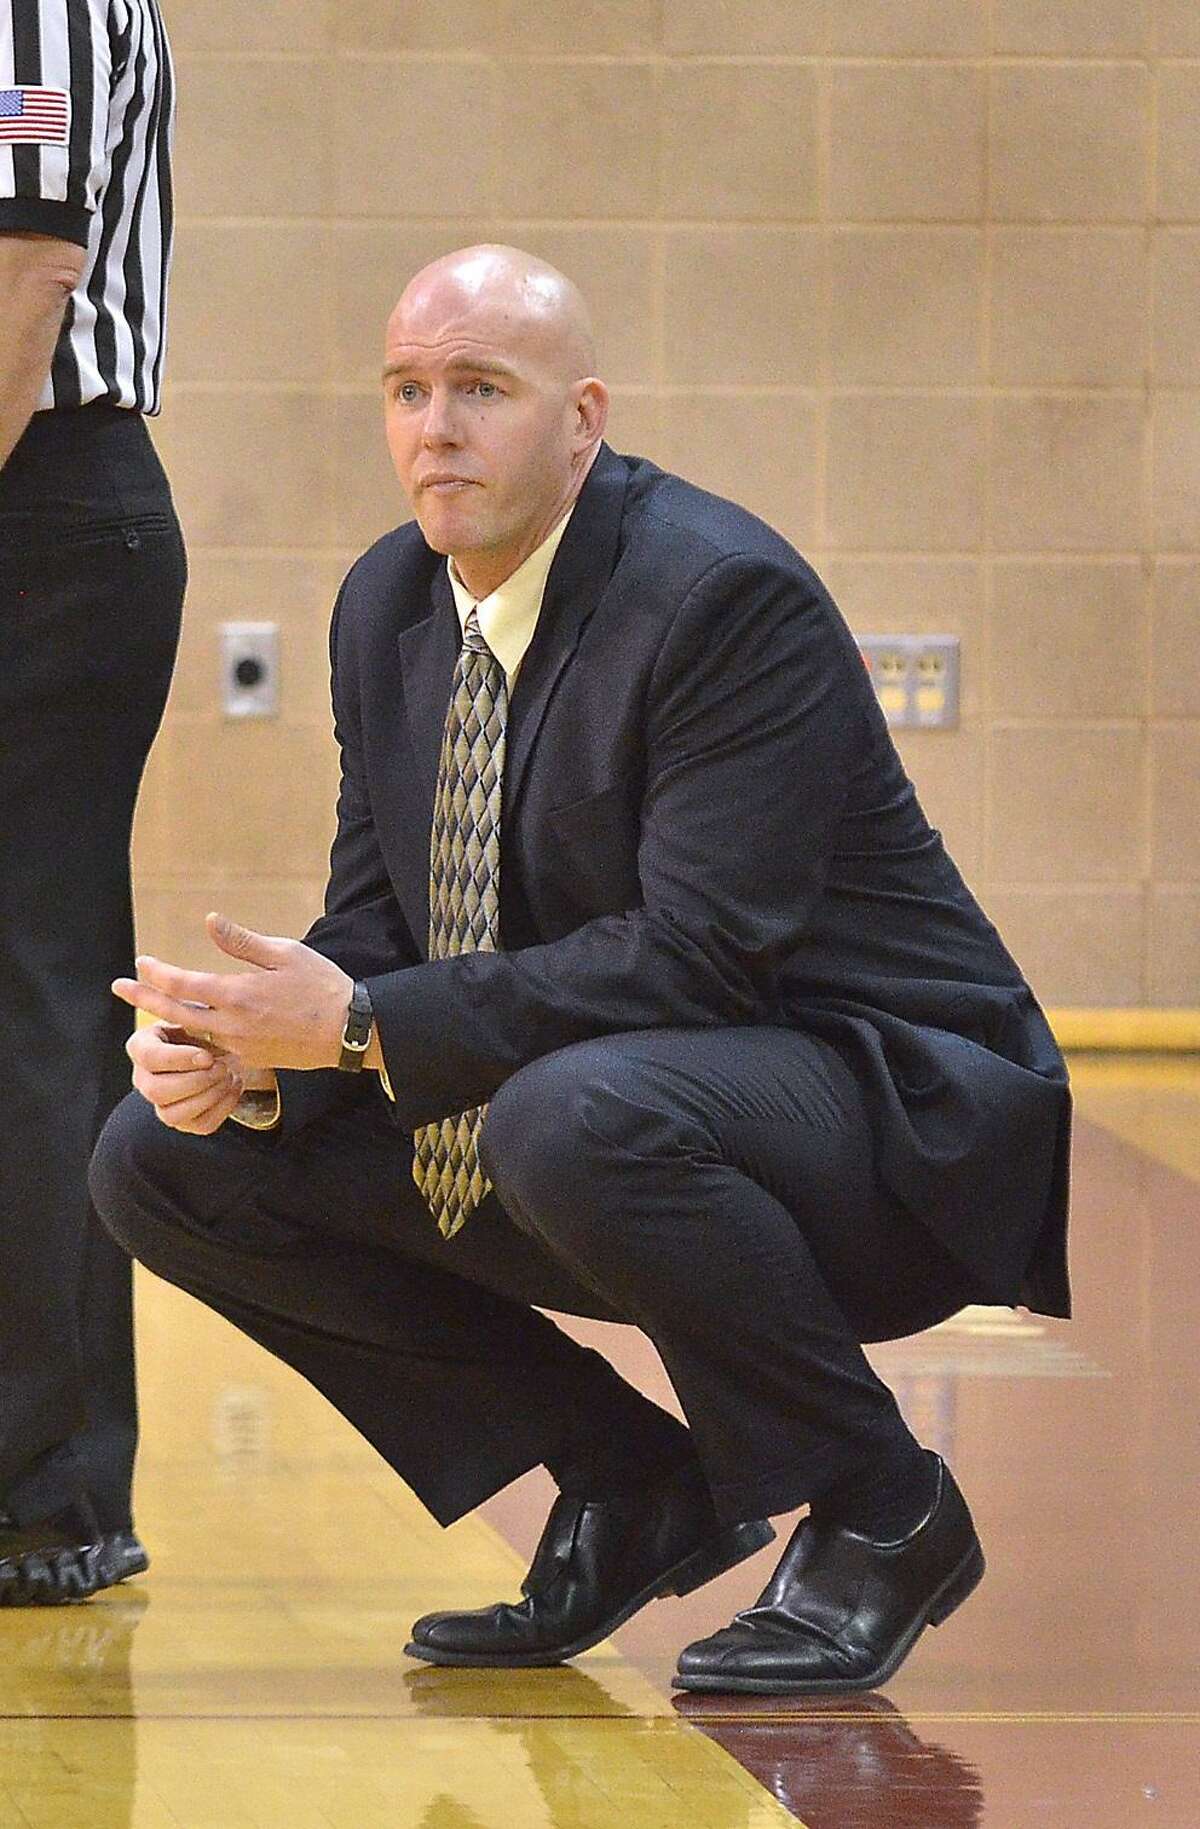 During his third season at TAMIU, the school fired head coach Jeff Caha after the team’s 0-13 start. The Dustdevils suffered their largest conference loss in school history Thursday night falling 89-39 at home to Lubbock Christian.